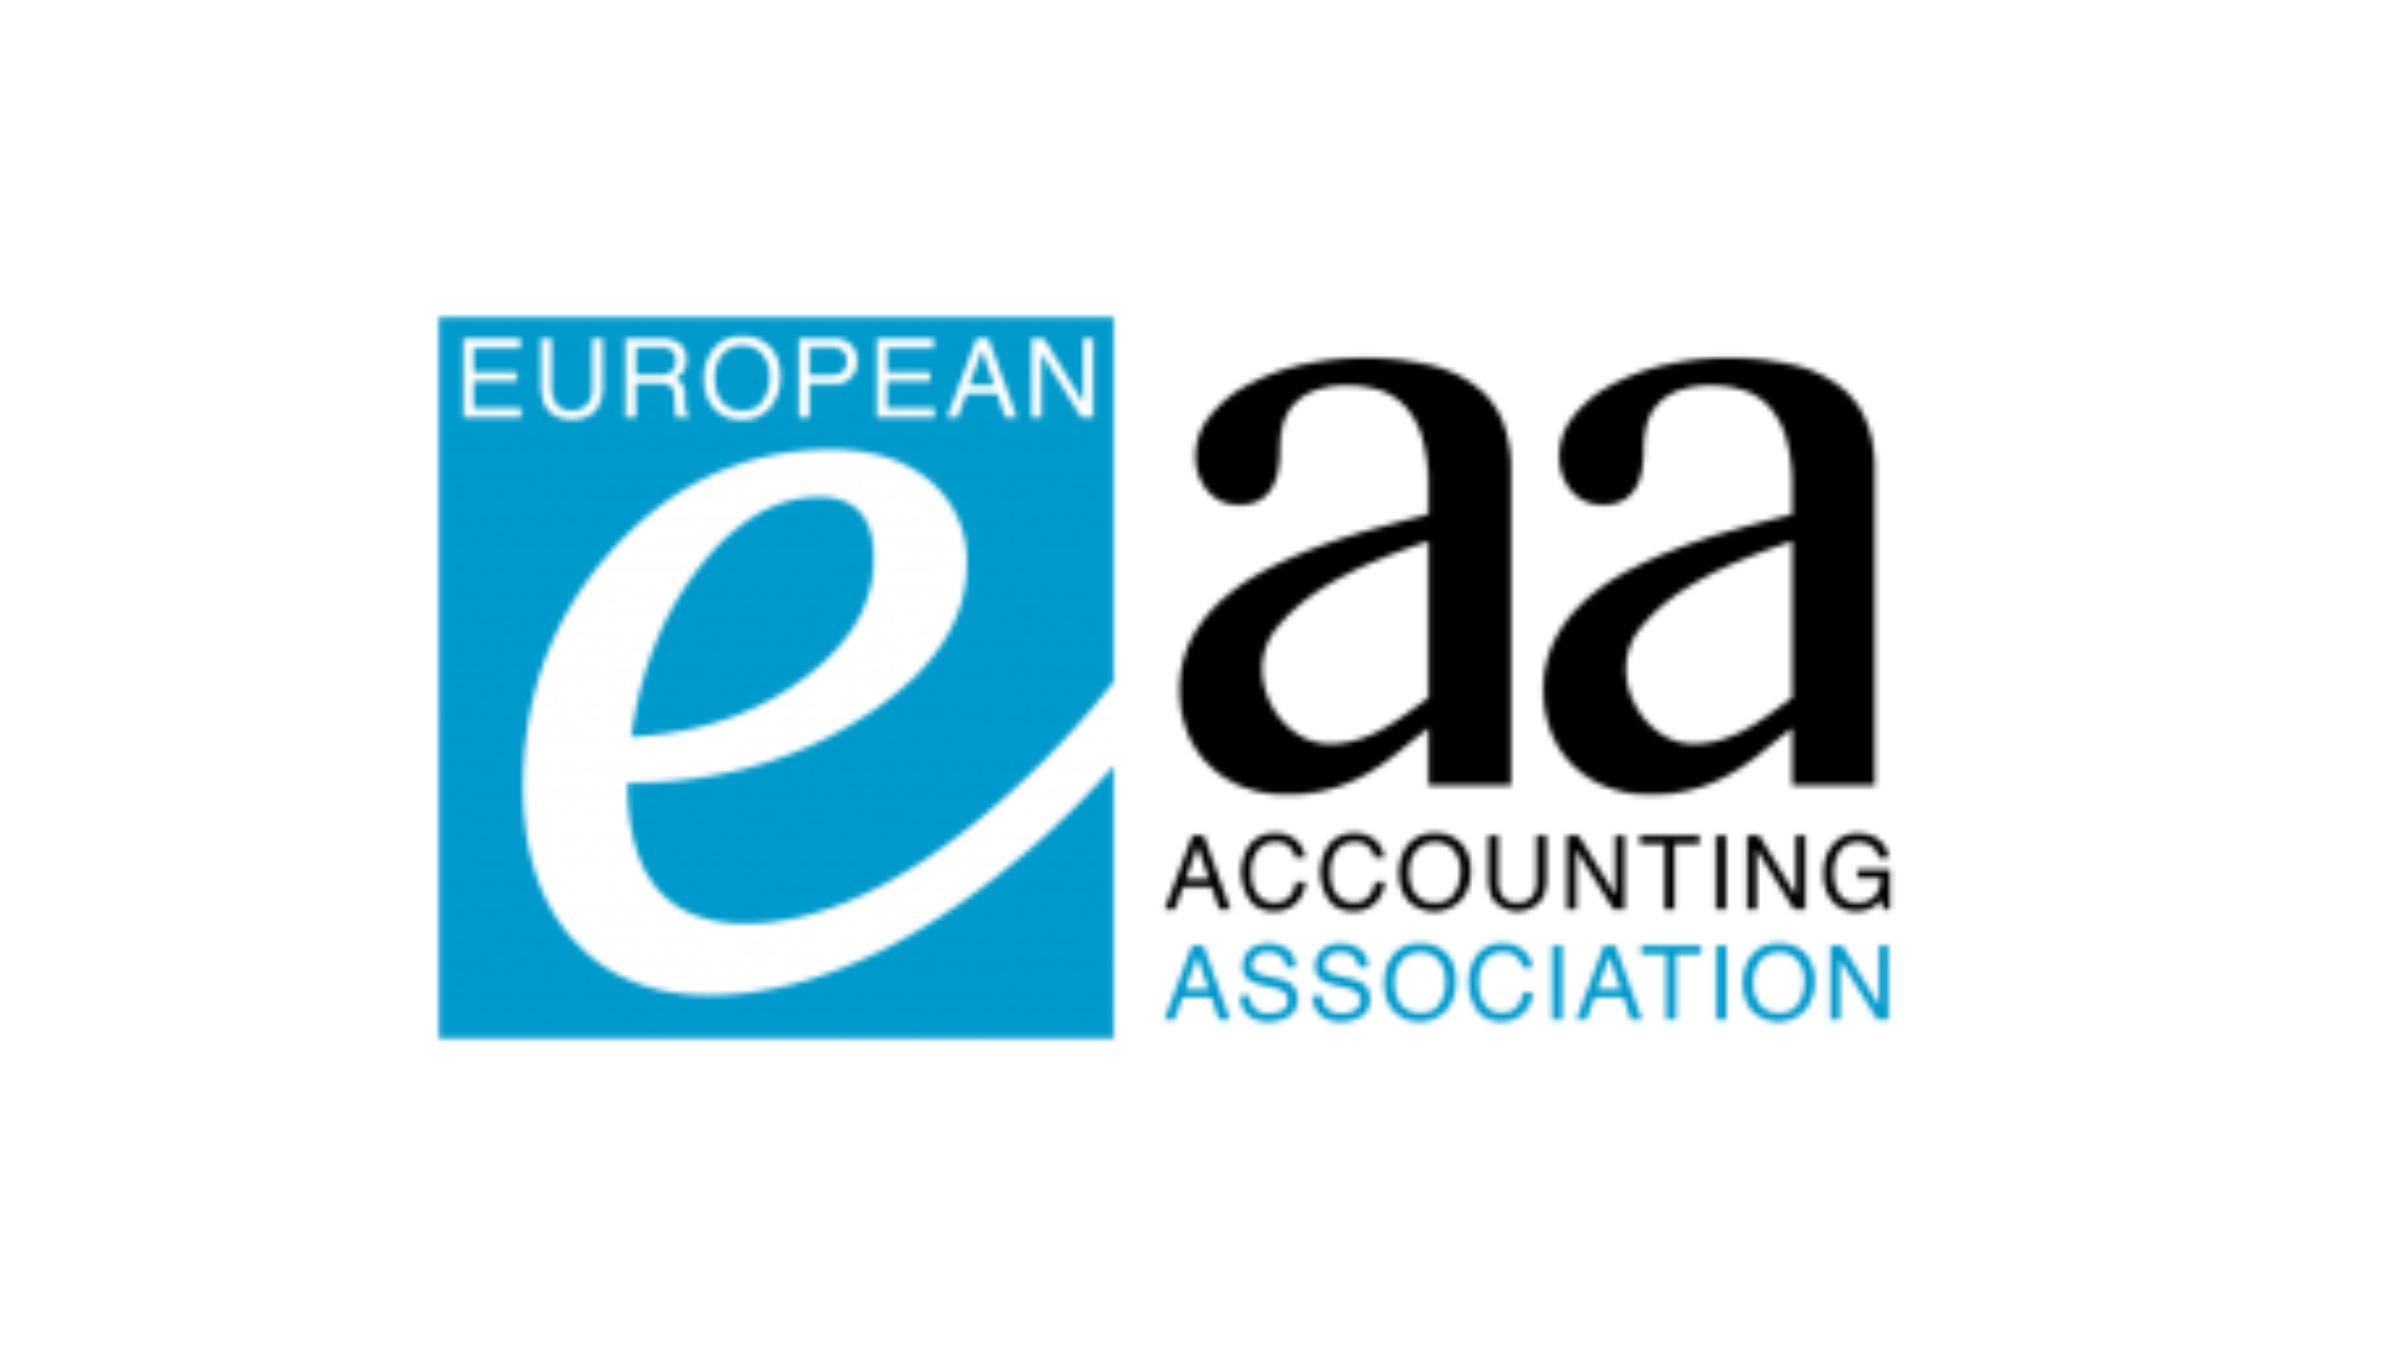 Equality, diversity and inclusion (EDI) & Accounting Education: a dialogue North & South